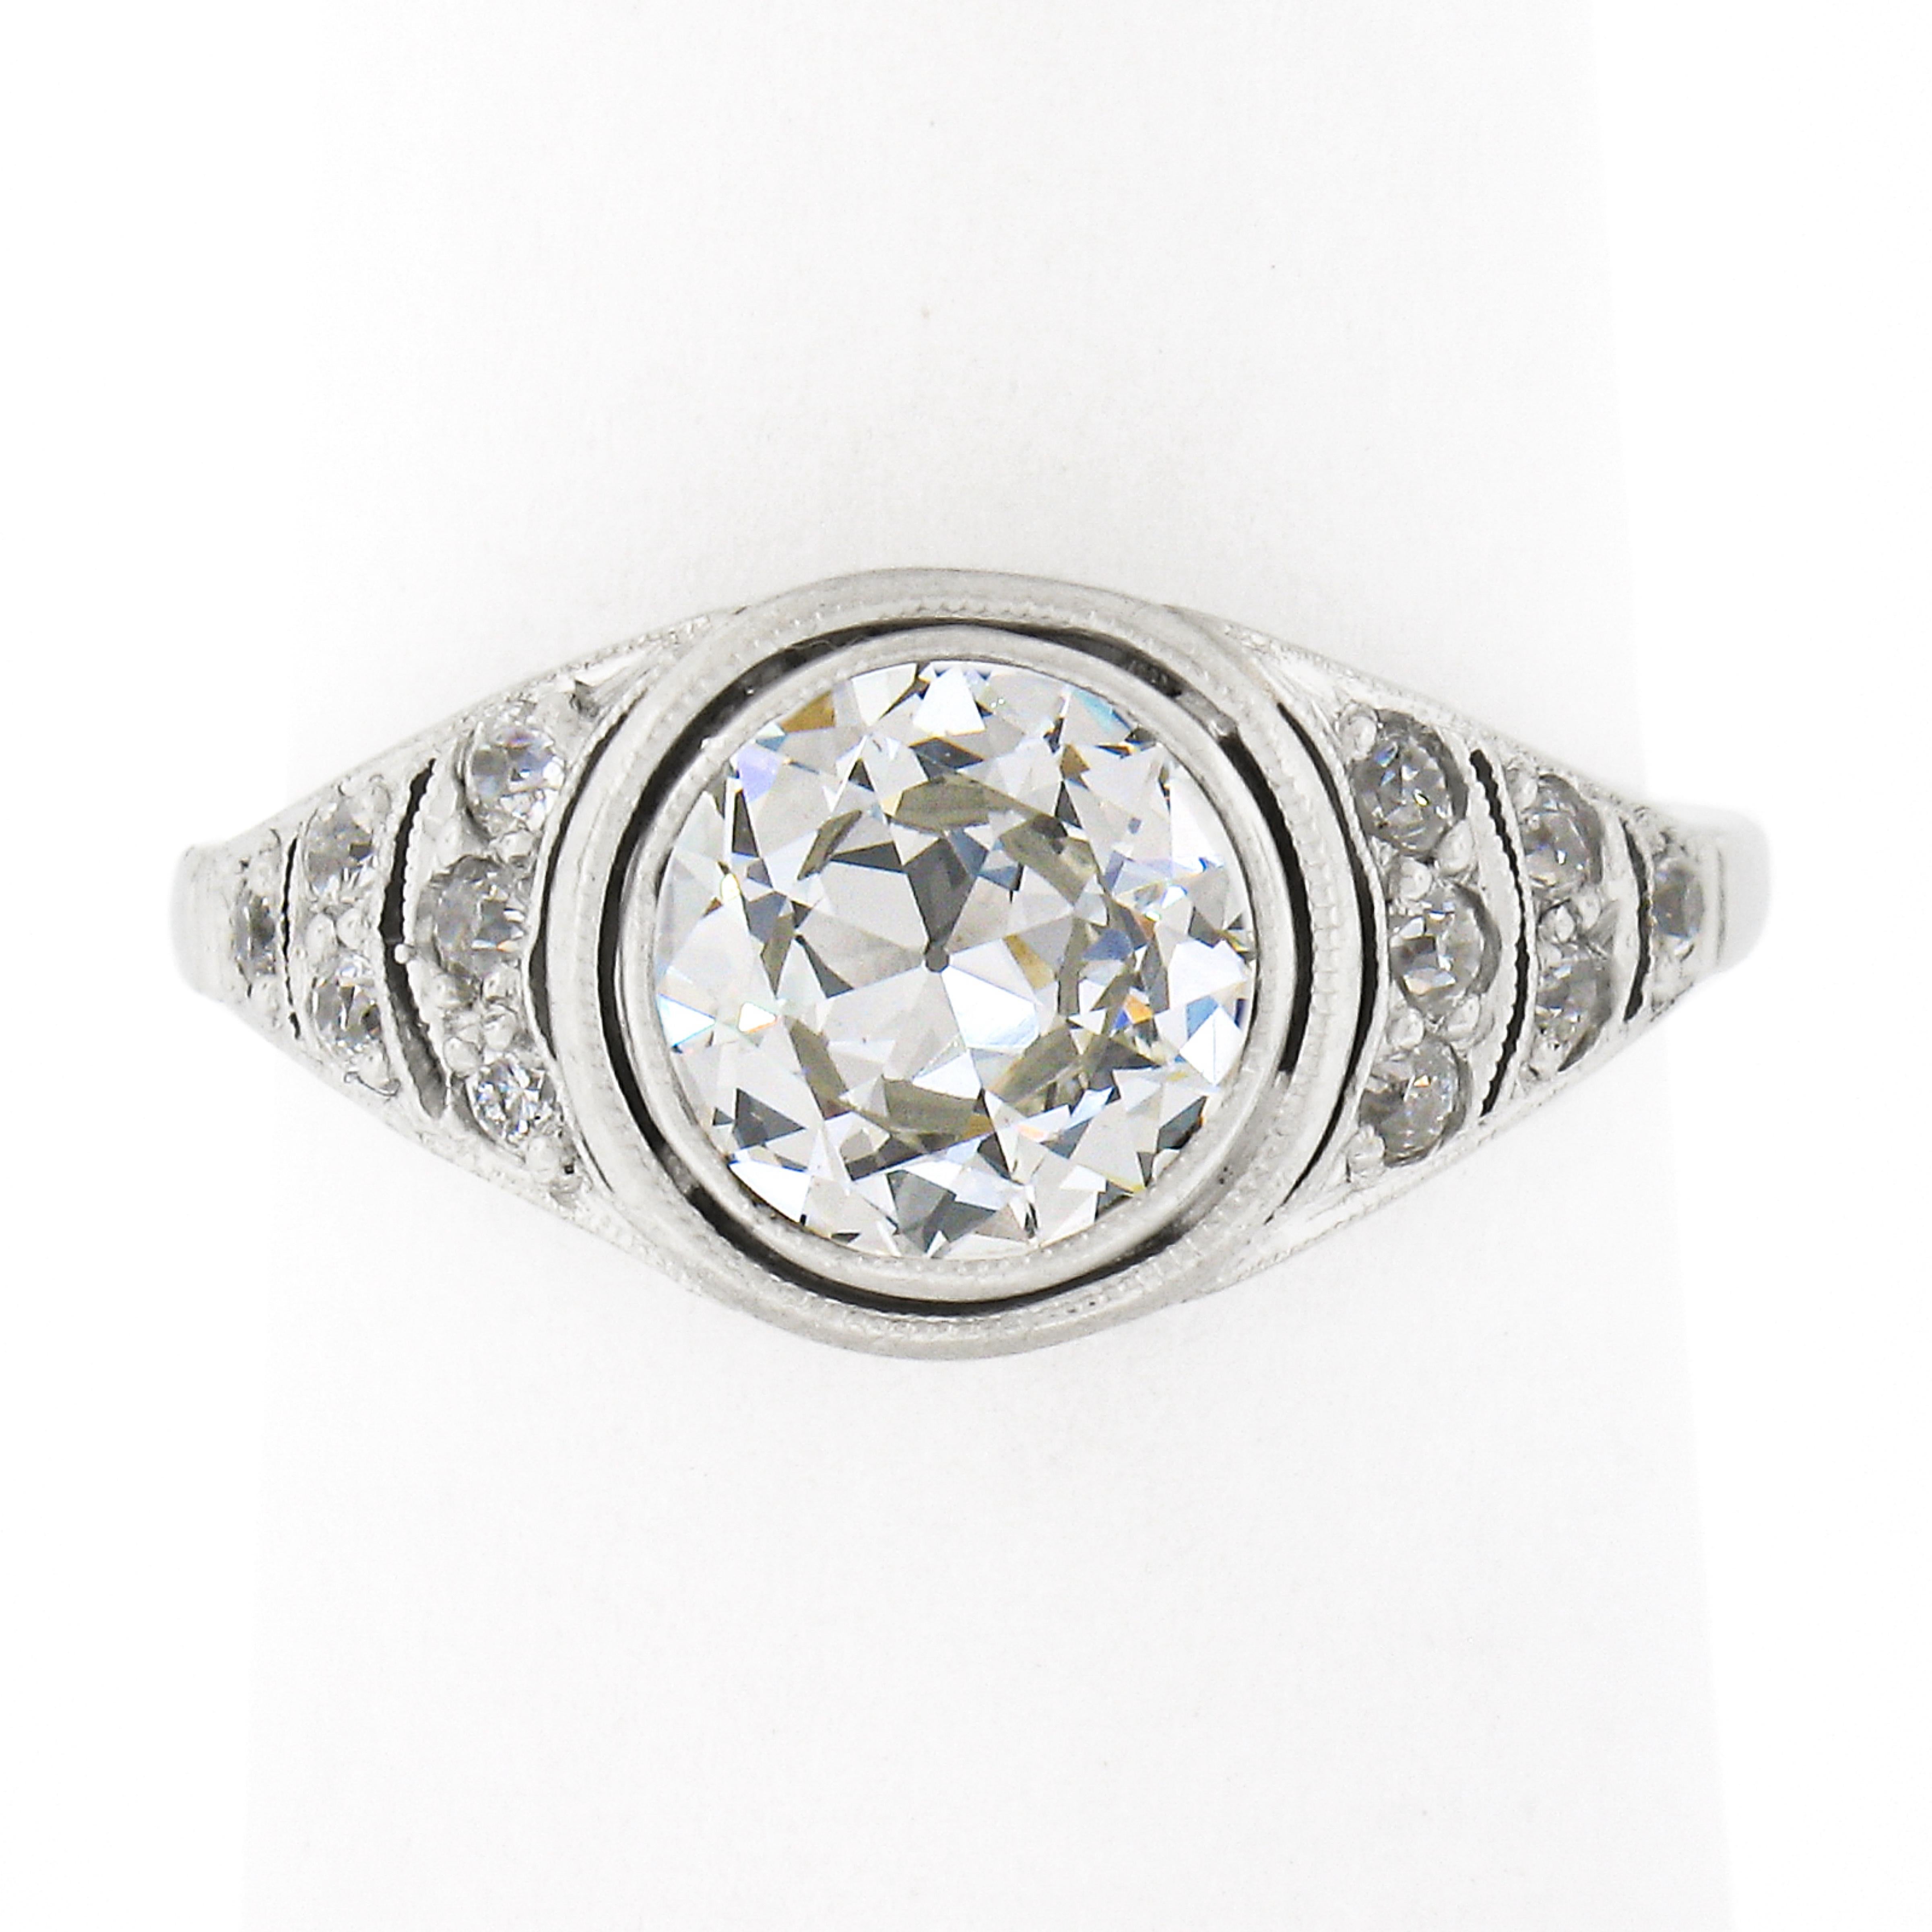 This magnificent antique engagement ring was crafted in solid platinum during the Edwardian period and features a gorgeous old European cut diamond solitaire neatly bezel set at the center of the unique and elegant design. This fine quality diamond